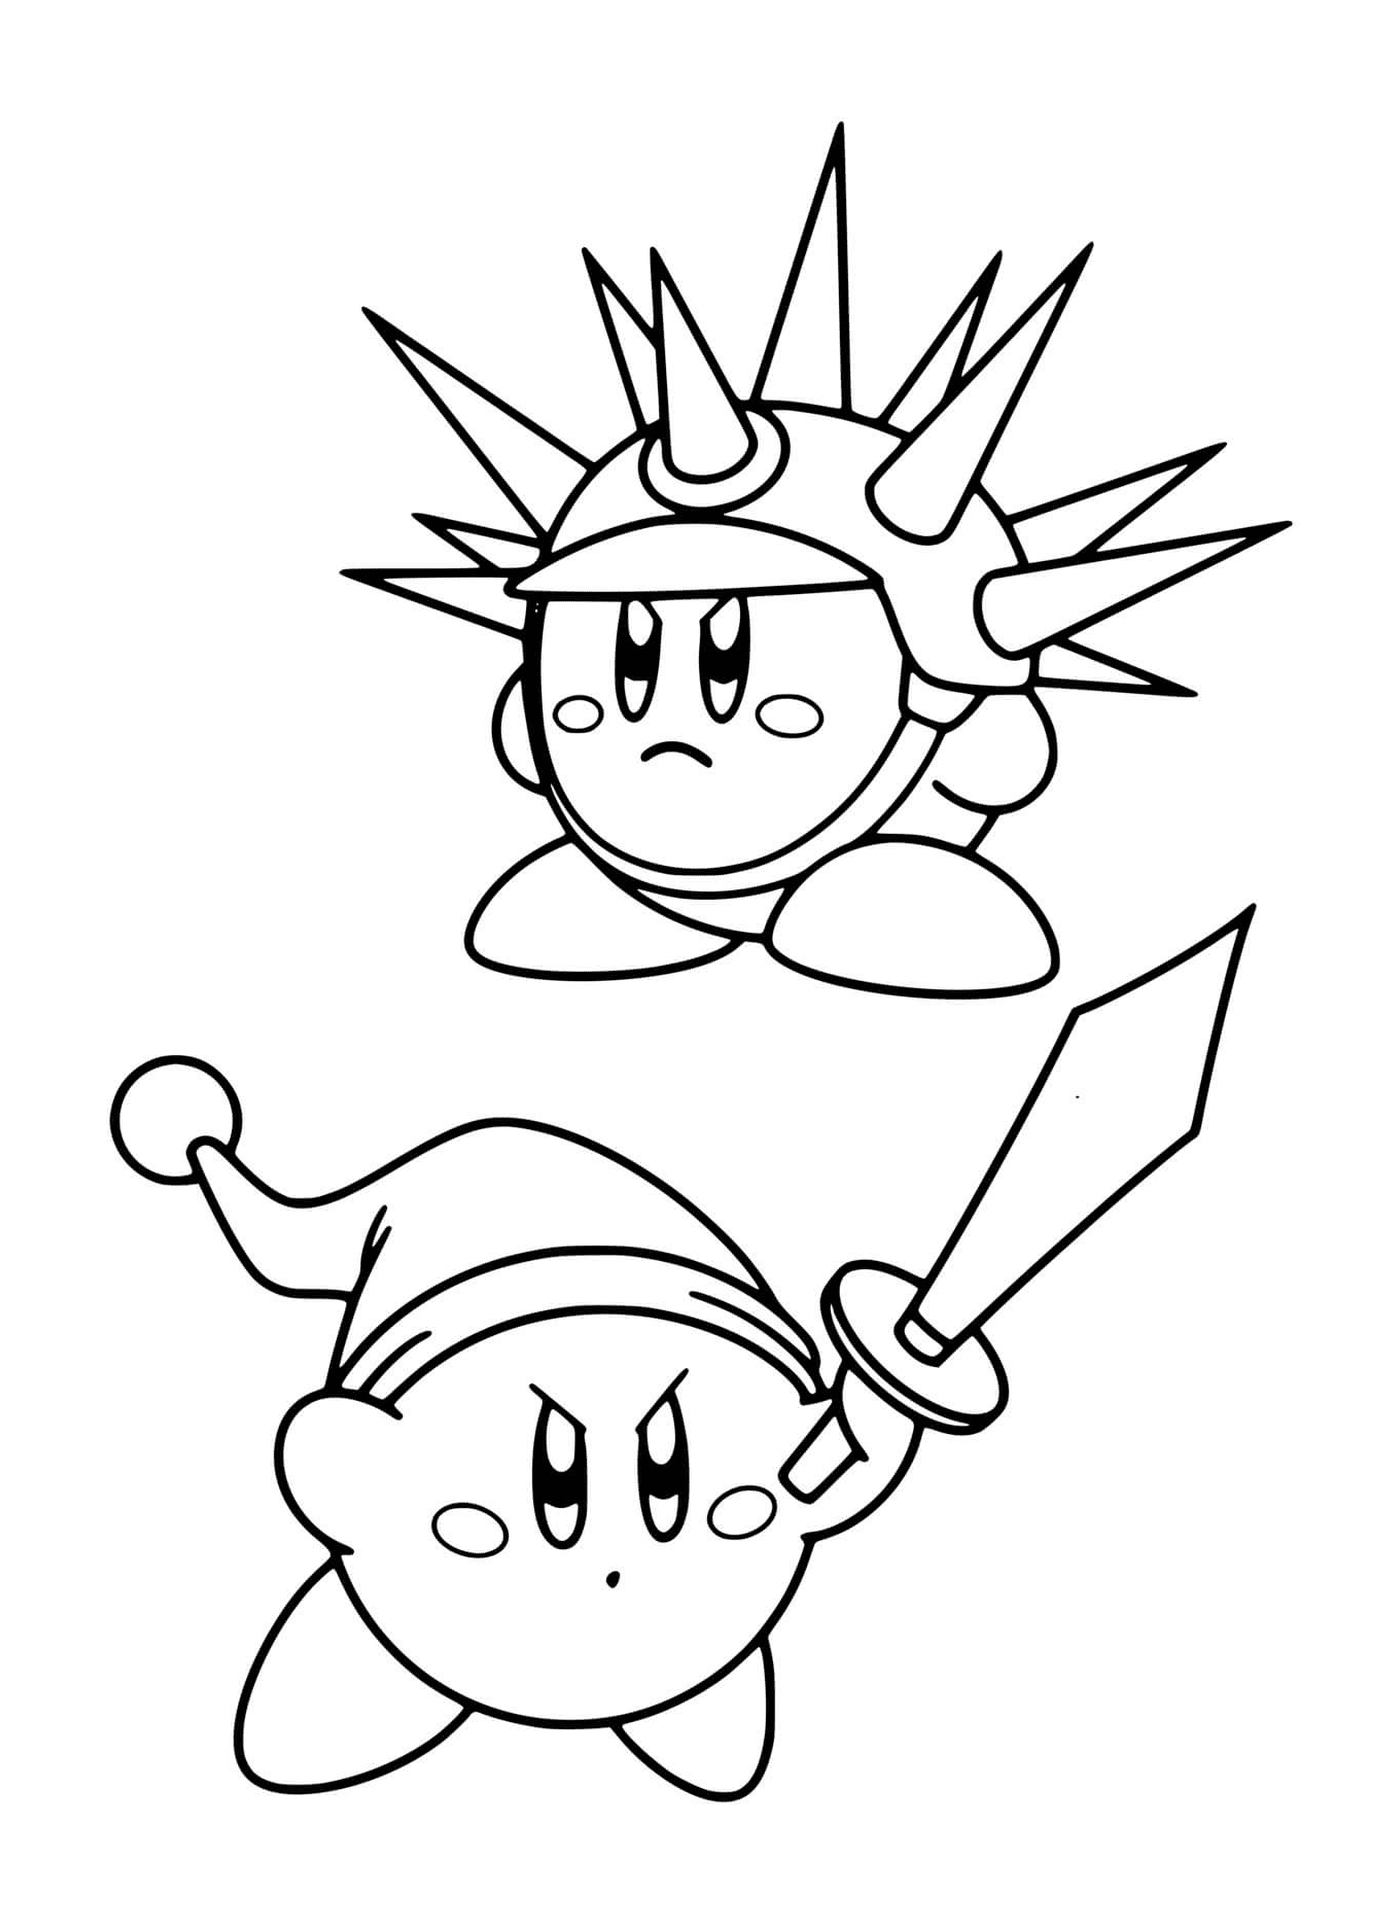  Two characters from Kirby Fighters 2 